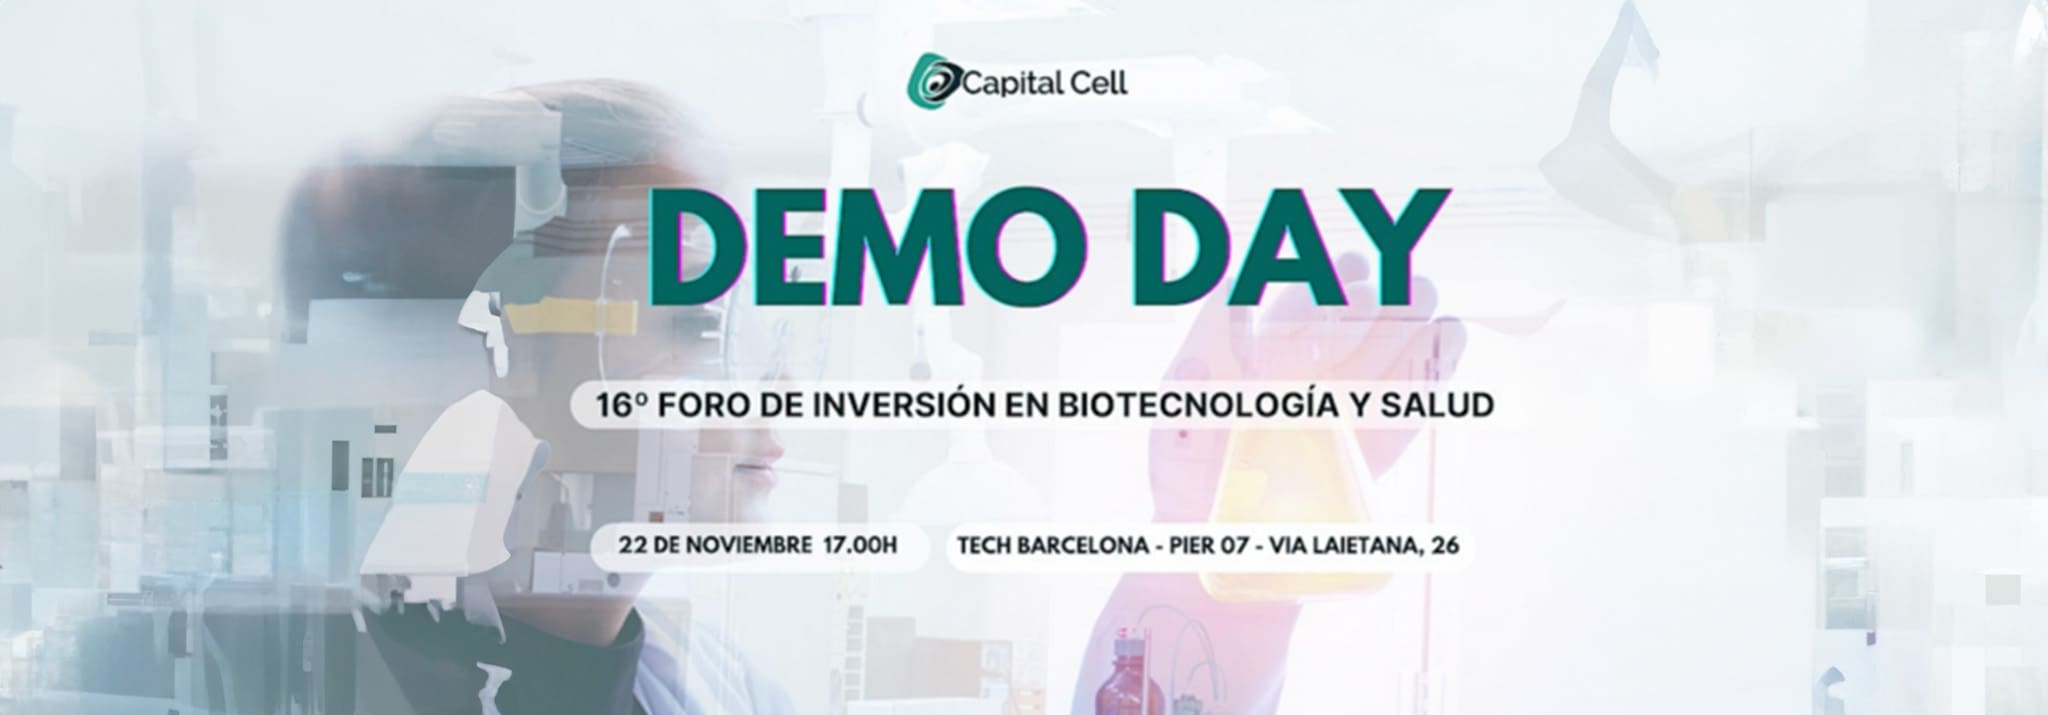 Join Demo Day, the Investment Forum of Capital Cell